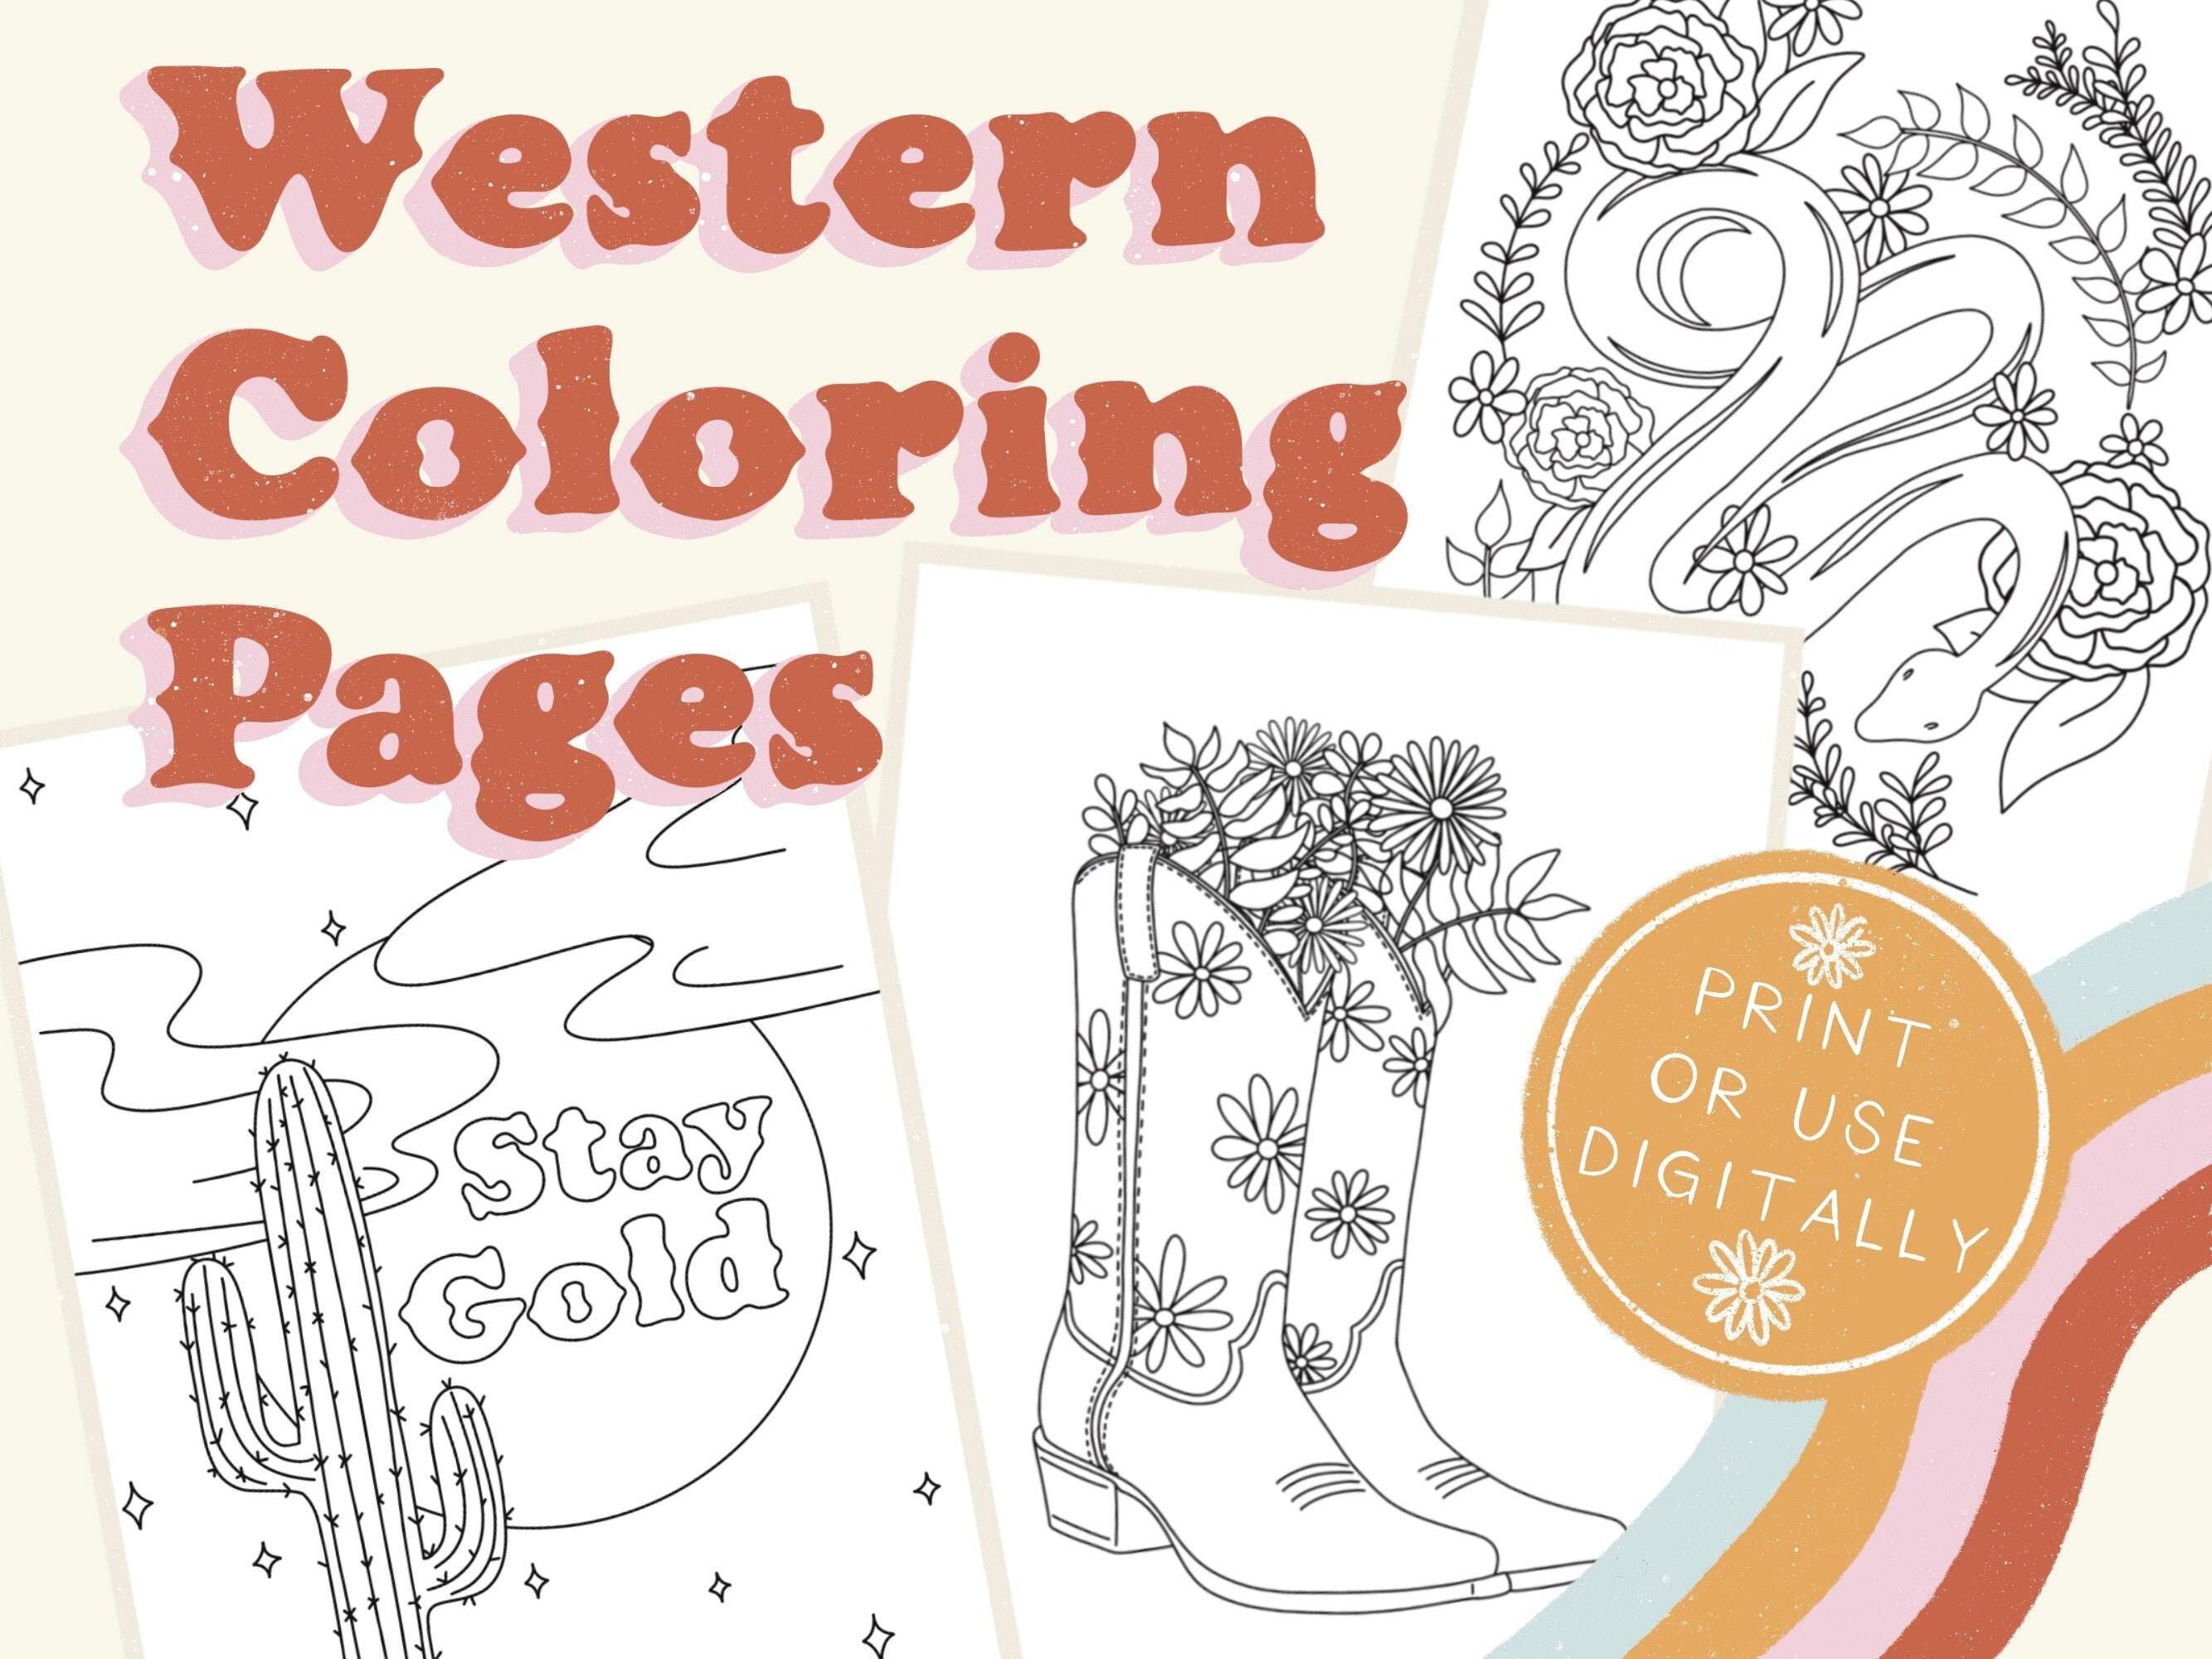 Western coloring pages